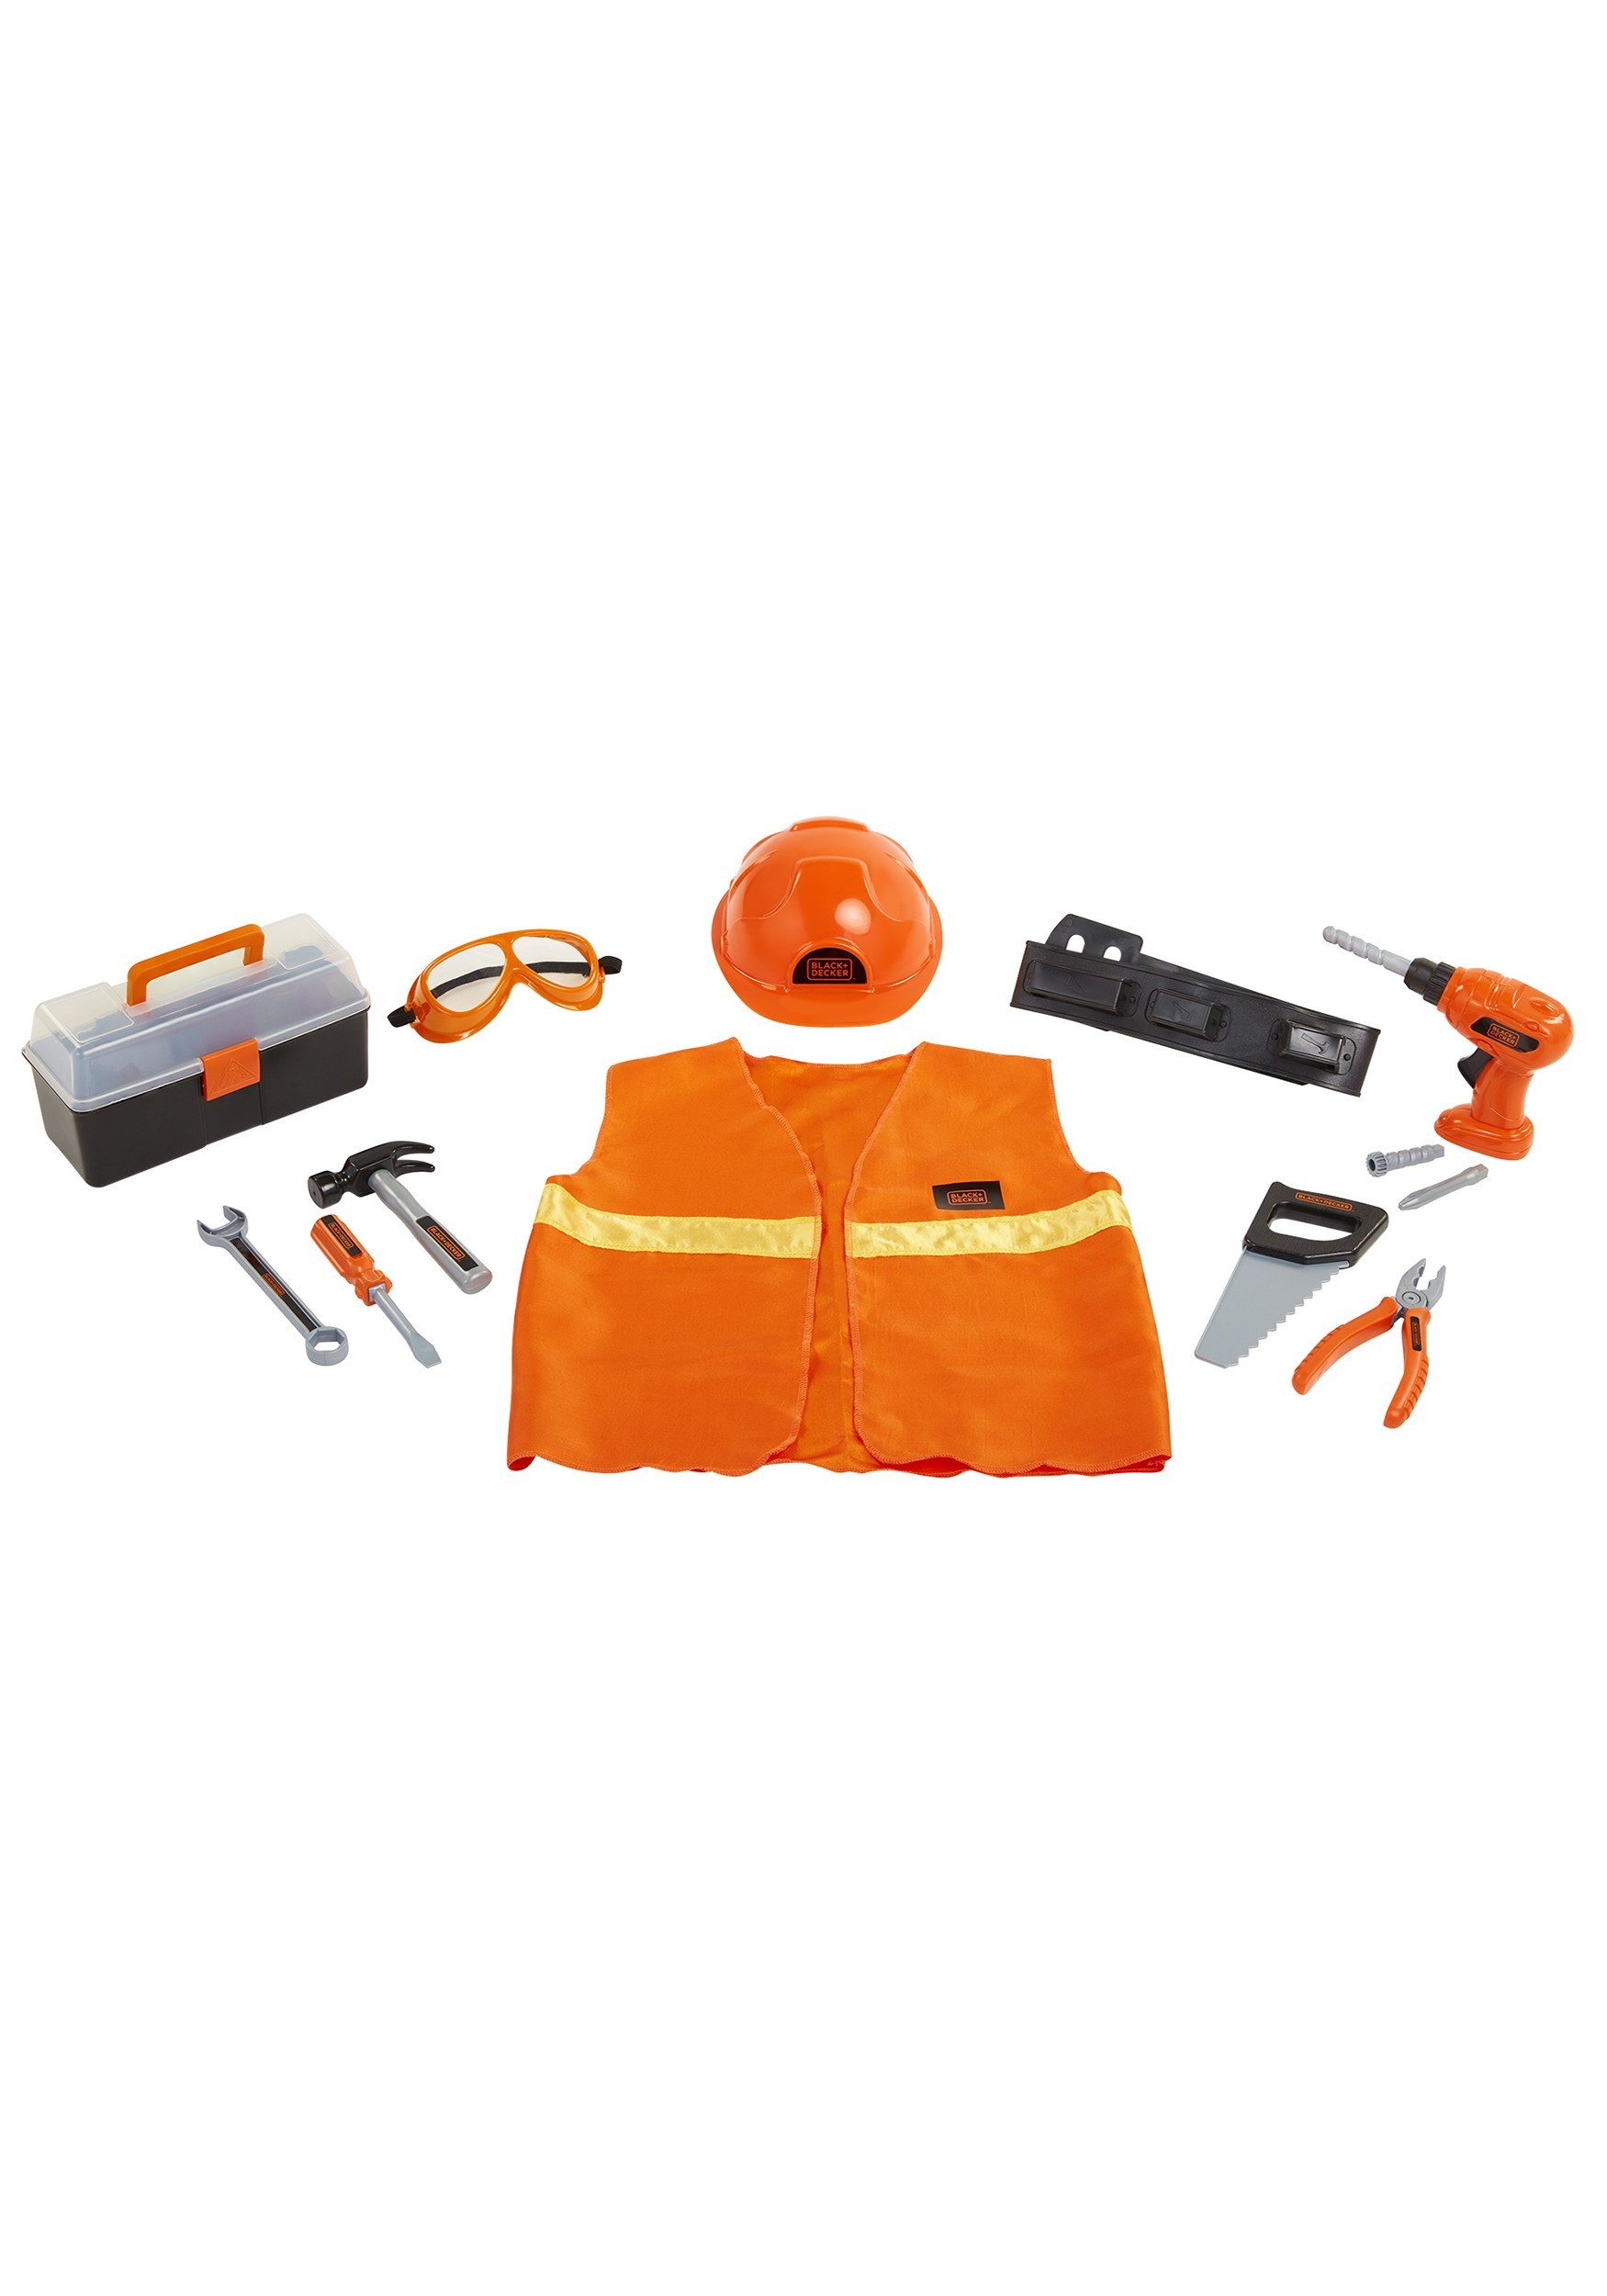 Black & Decker Dressup Playset with Toolbox Accessory